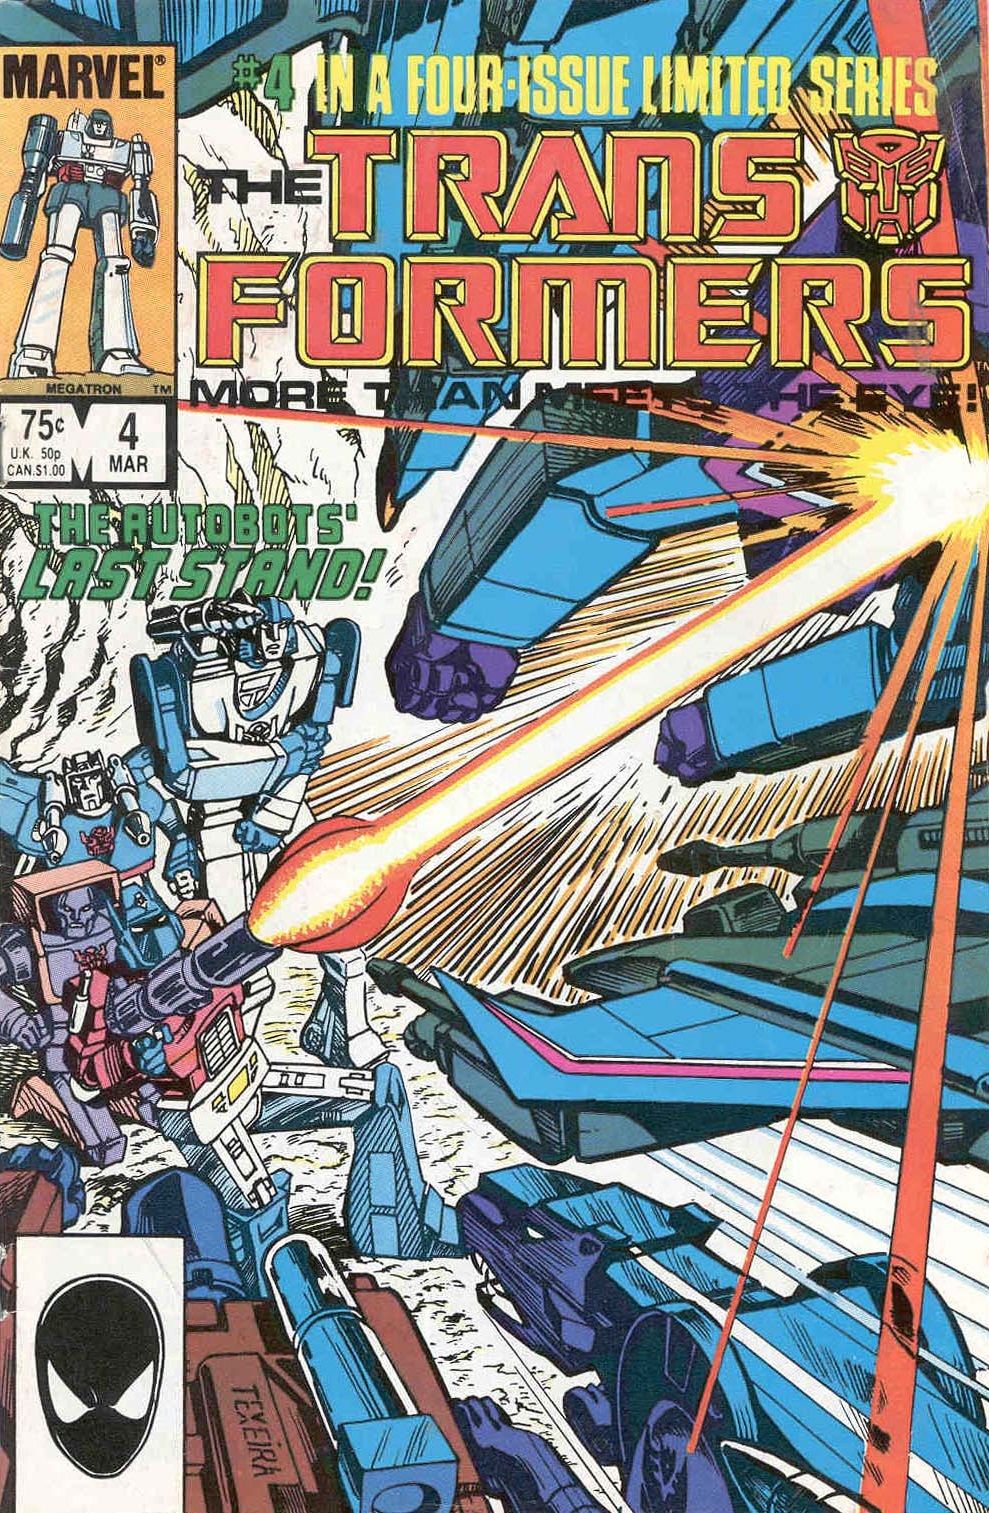 The cover to Transformers #4